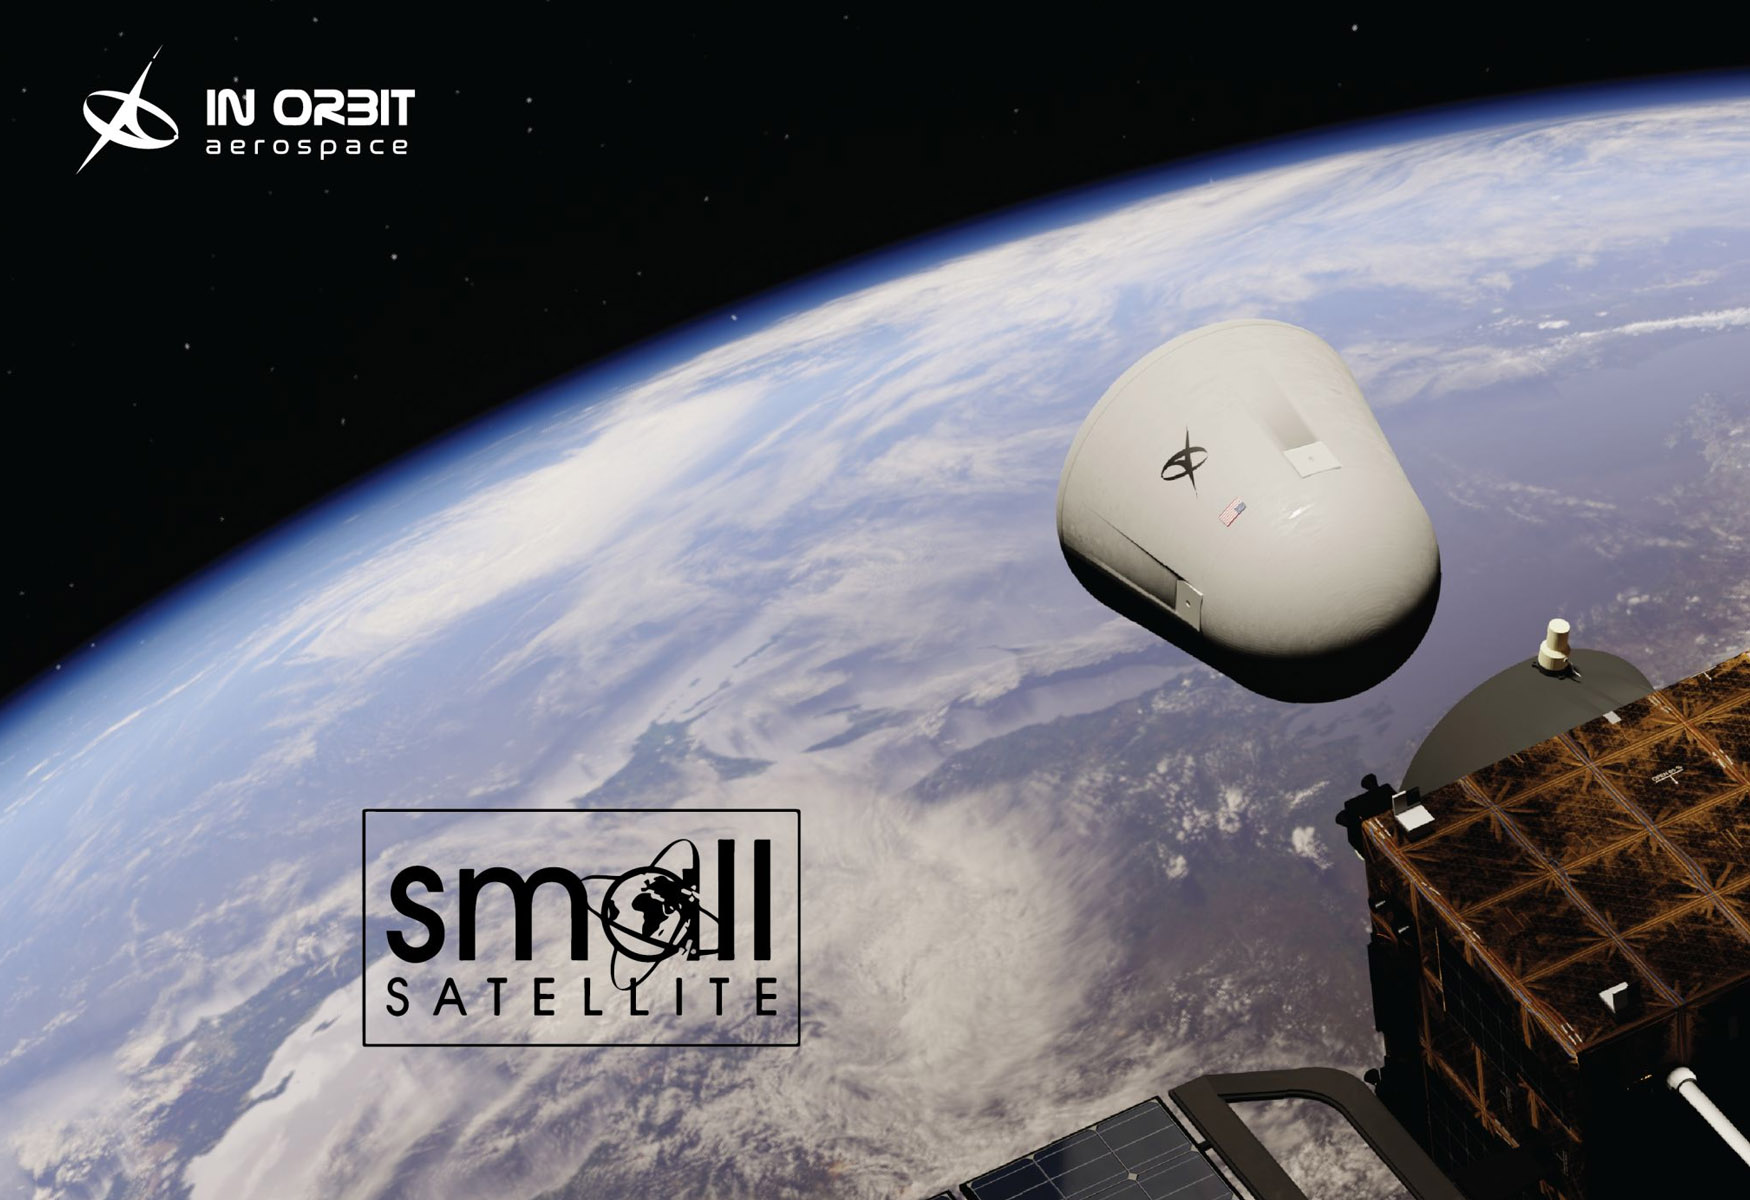 in-orbit-aerospace-revolutionizing-space-logistics-for-earth-to-space-commerce